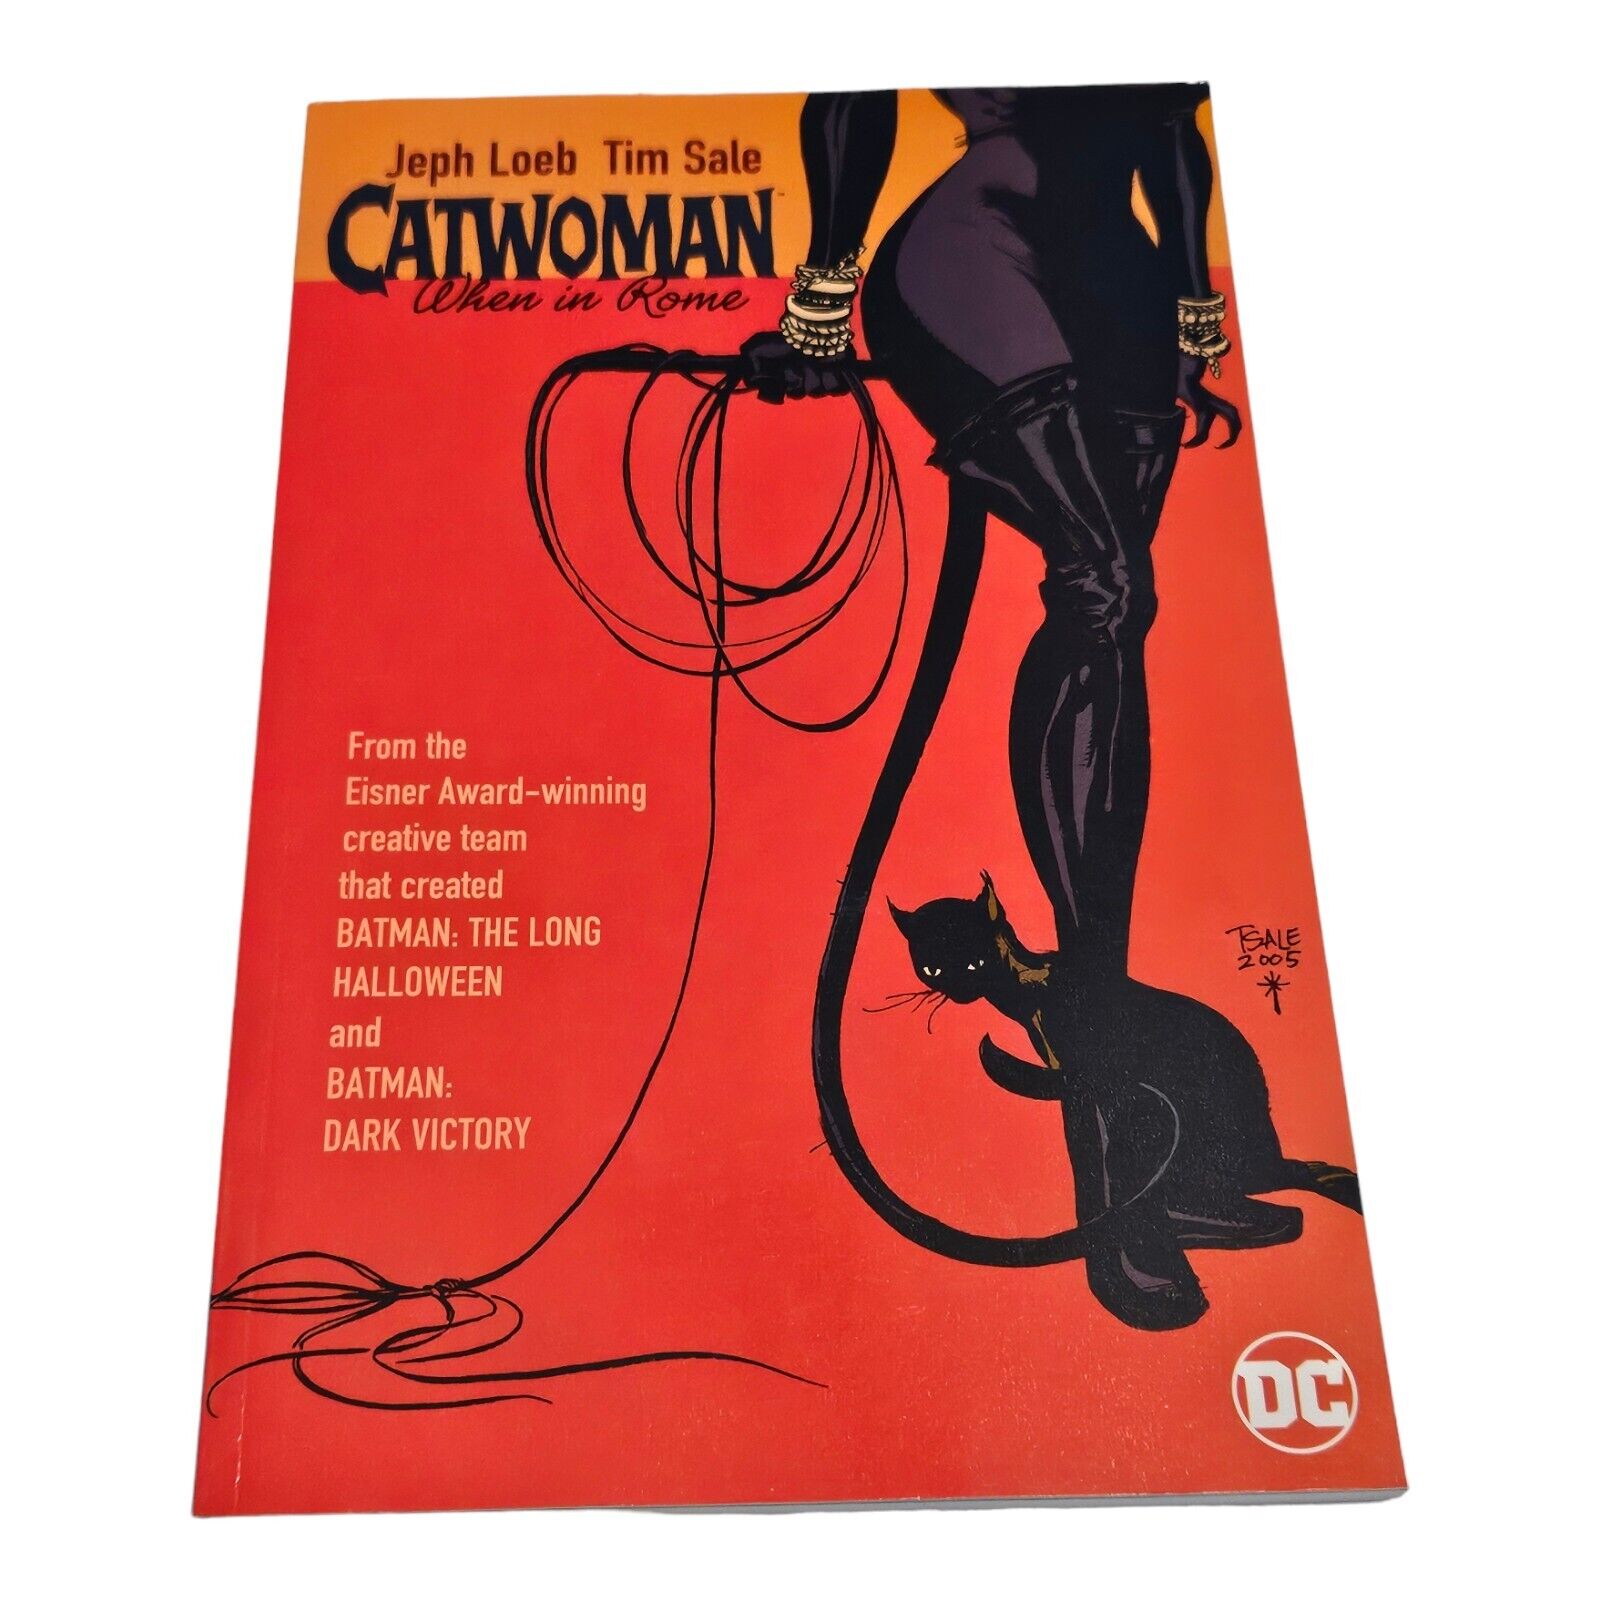 Catwoman: When in Rome (DC Comics, 2005 August 2007)